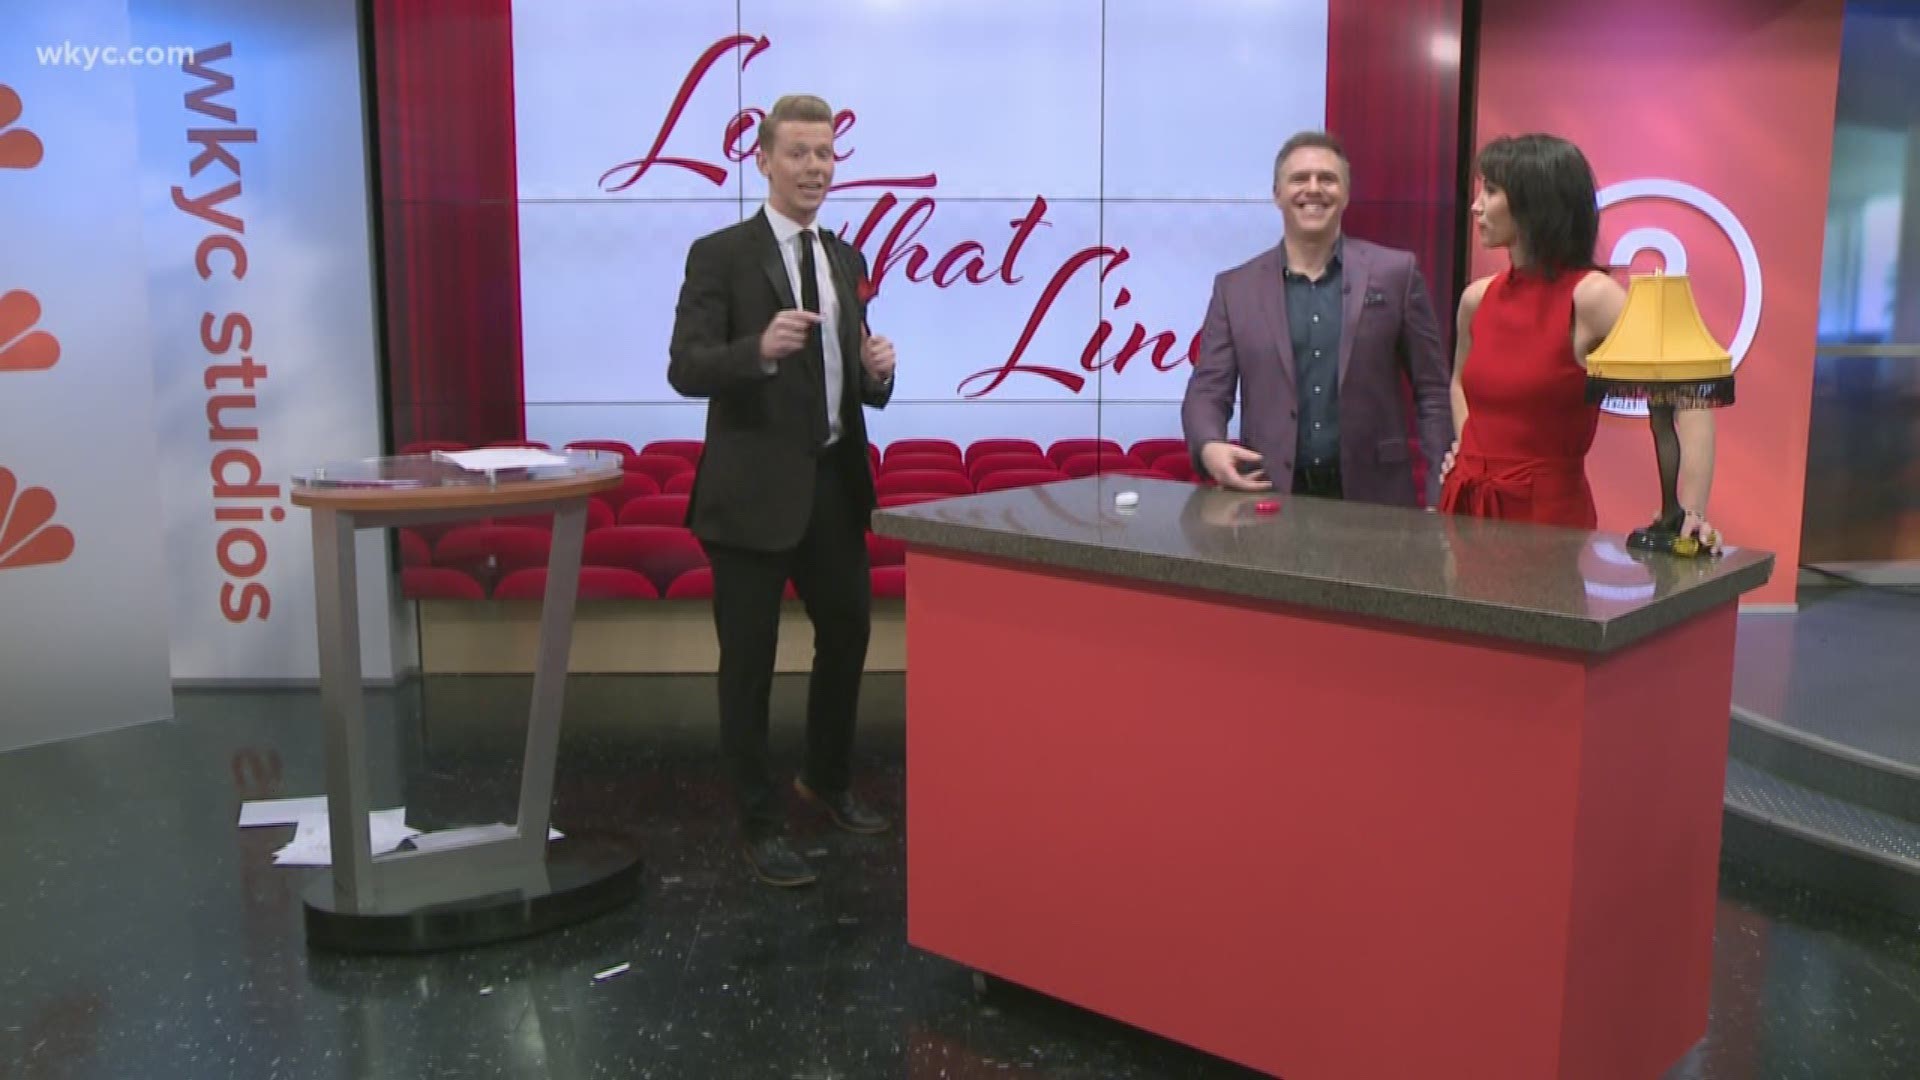 3News' Austin Love quizzes Jay and Betsy on their knowledge of romantic movies. Who will win the coveted leg lamp?